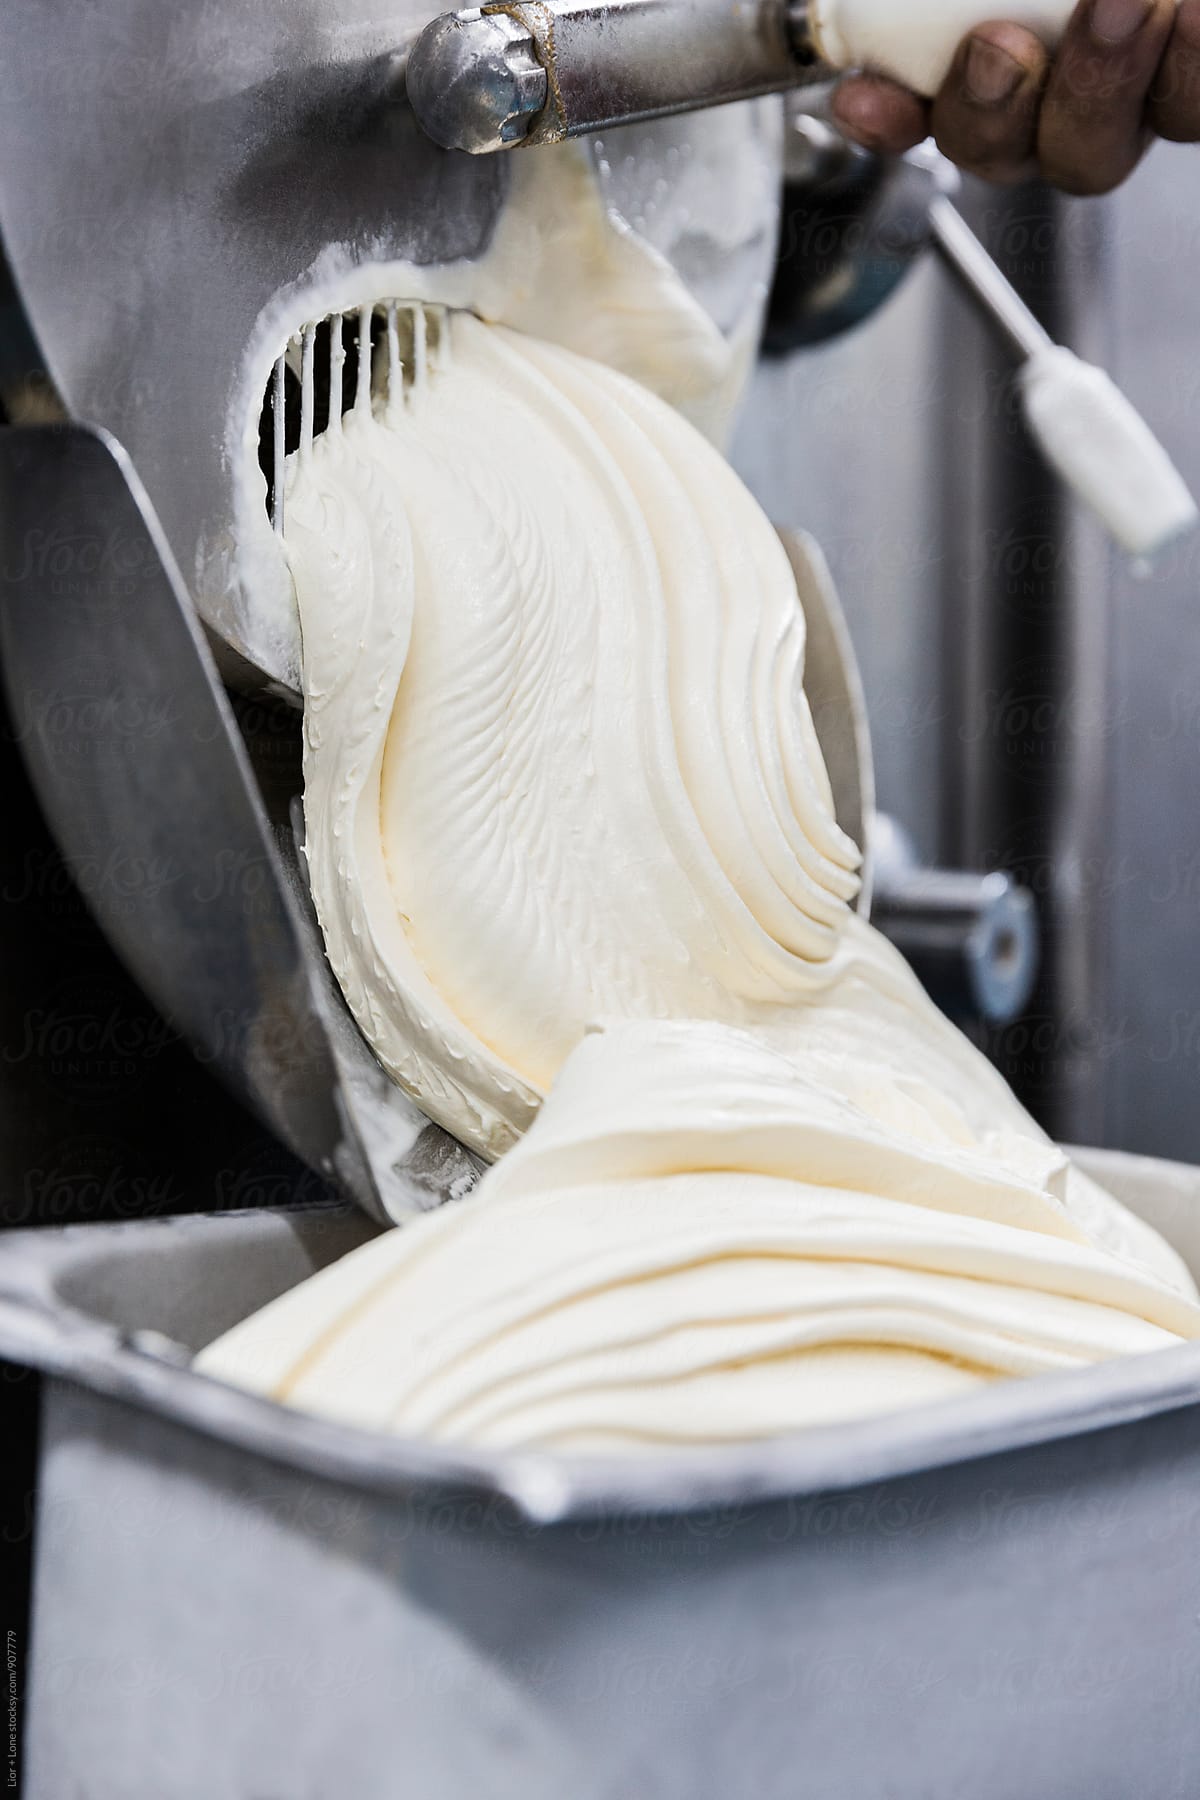 Thick vanilla ice cream following out of industrial machine